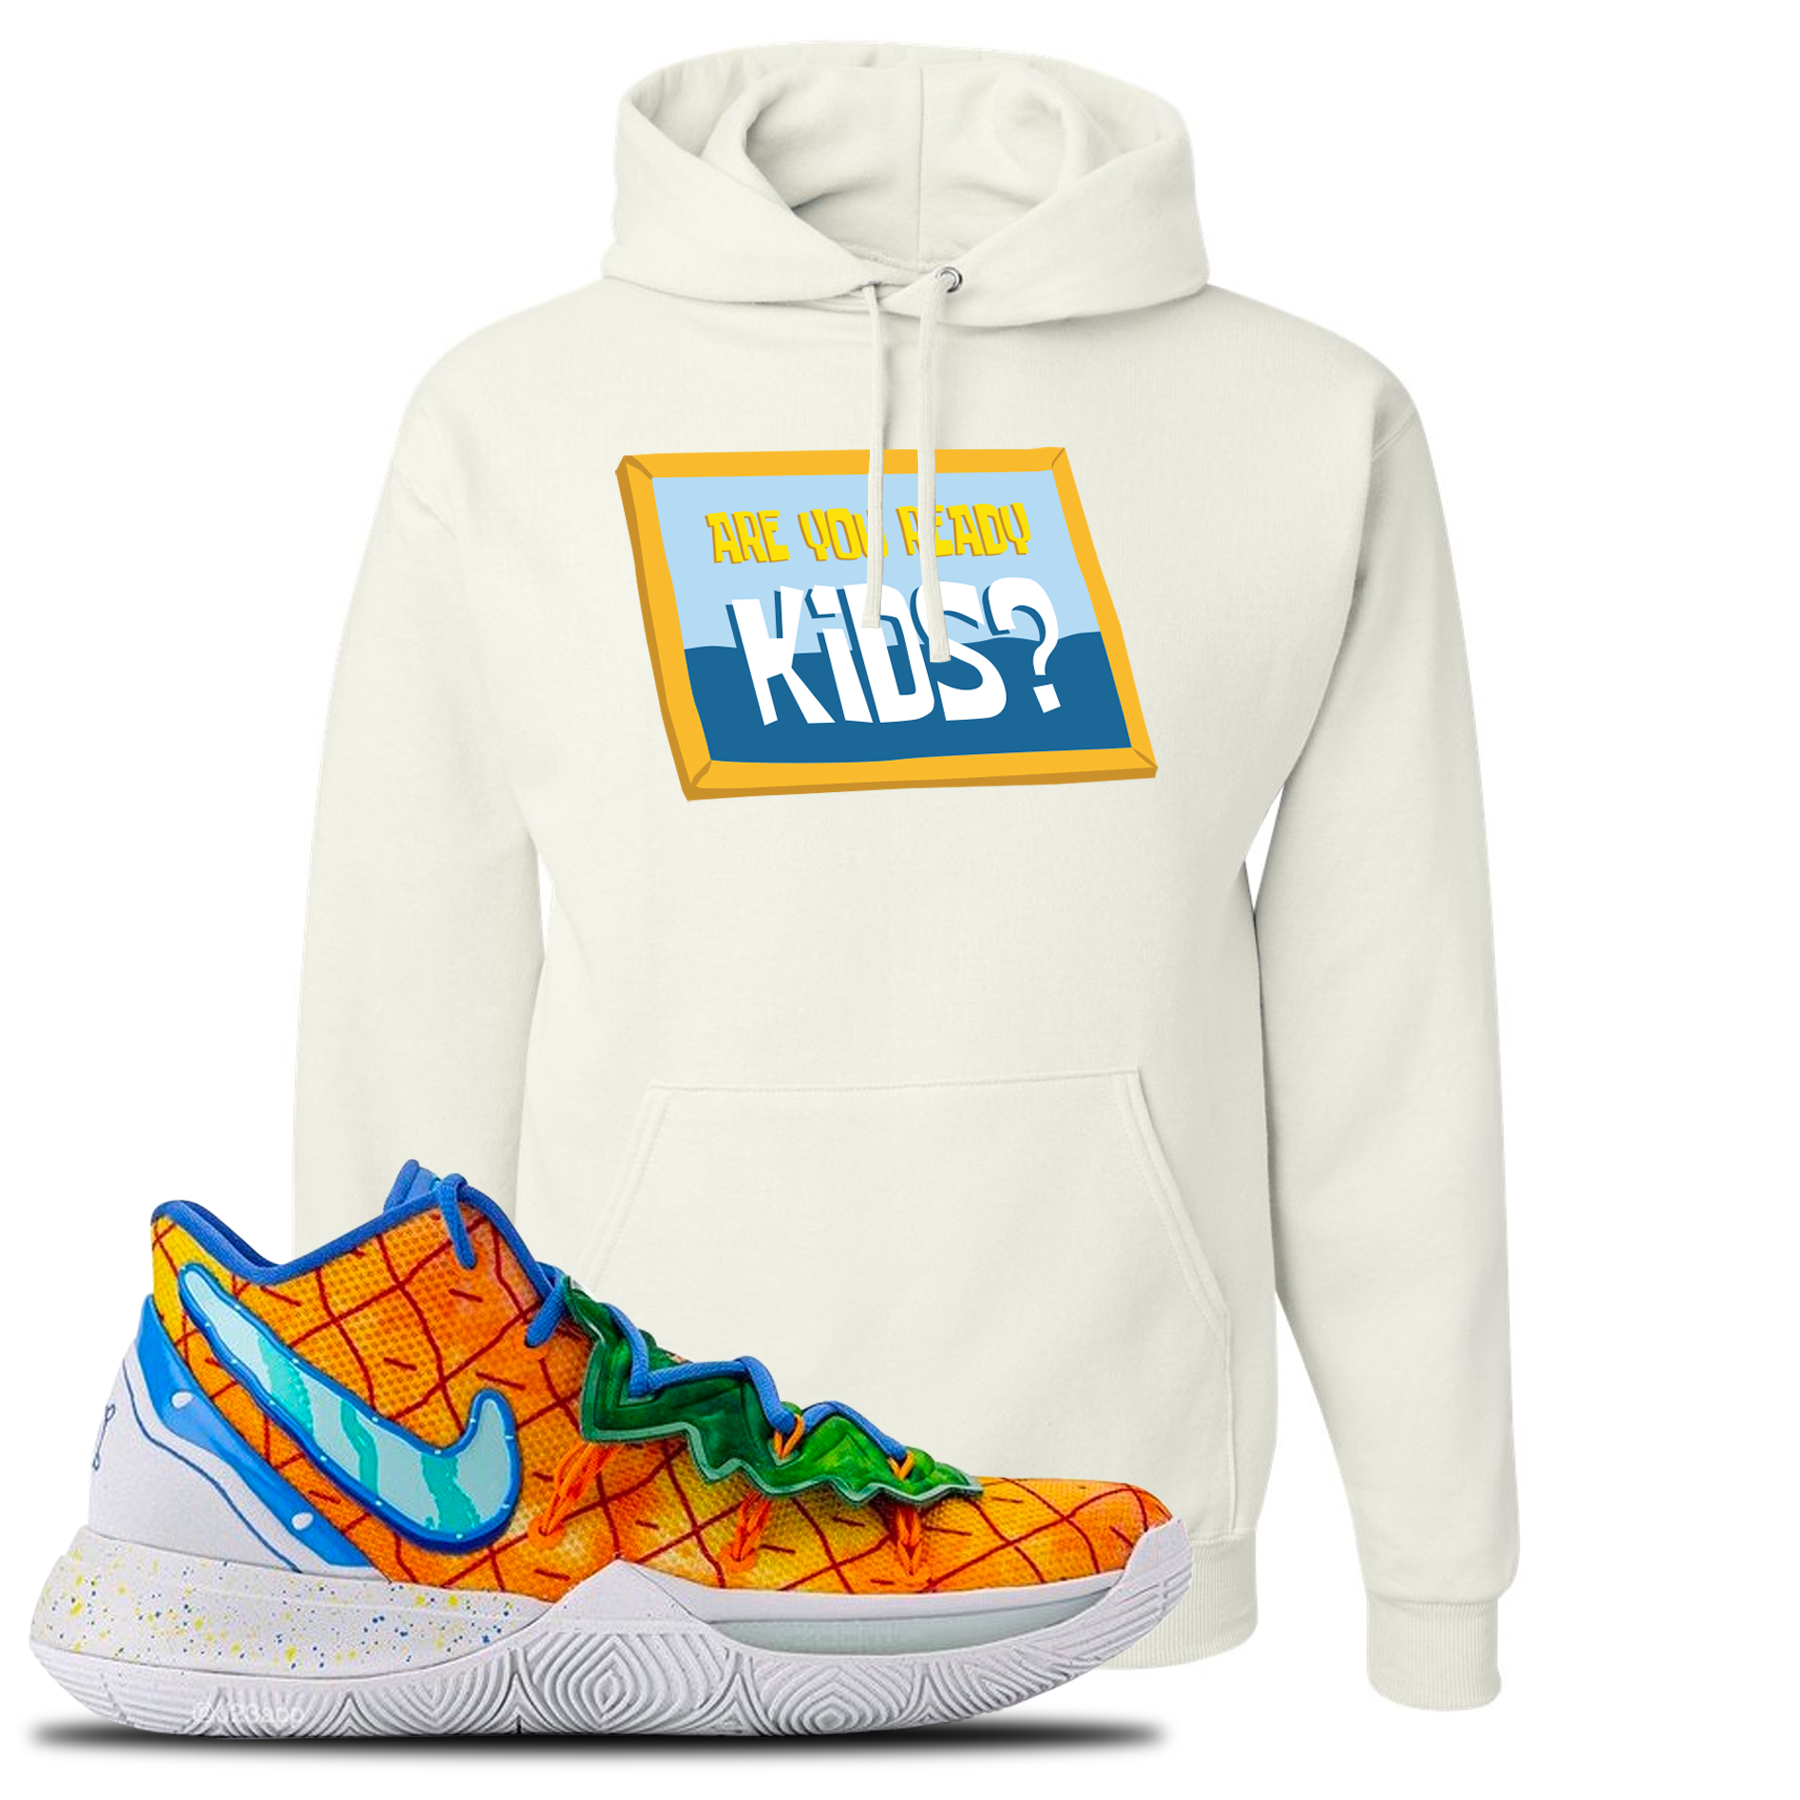 Kyrie 5 Pineapple House Are You Ready Kids? White Sneaker Hook Up Pullover Hoodie